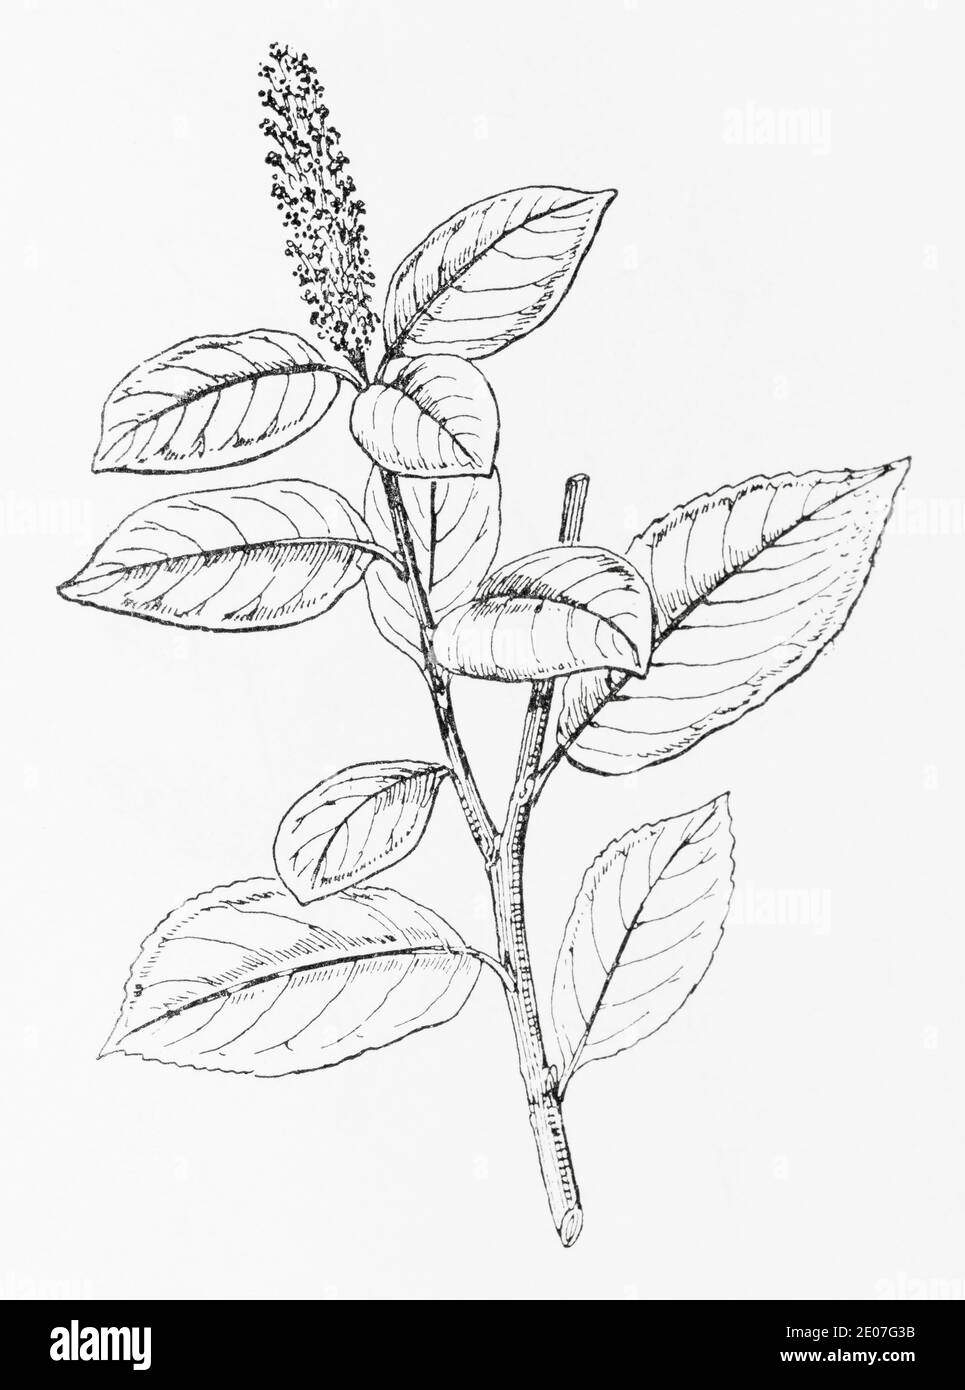 Old botanical illustration engraving of Bay-leaved Willow / Salix pentandra. Traditional medicinal herbal plant. See Notes Stock Photo